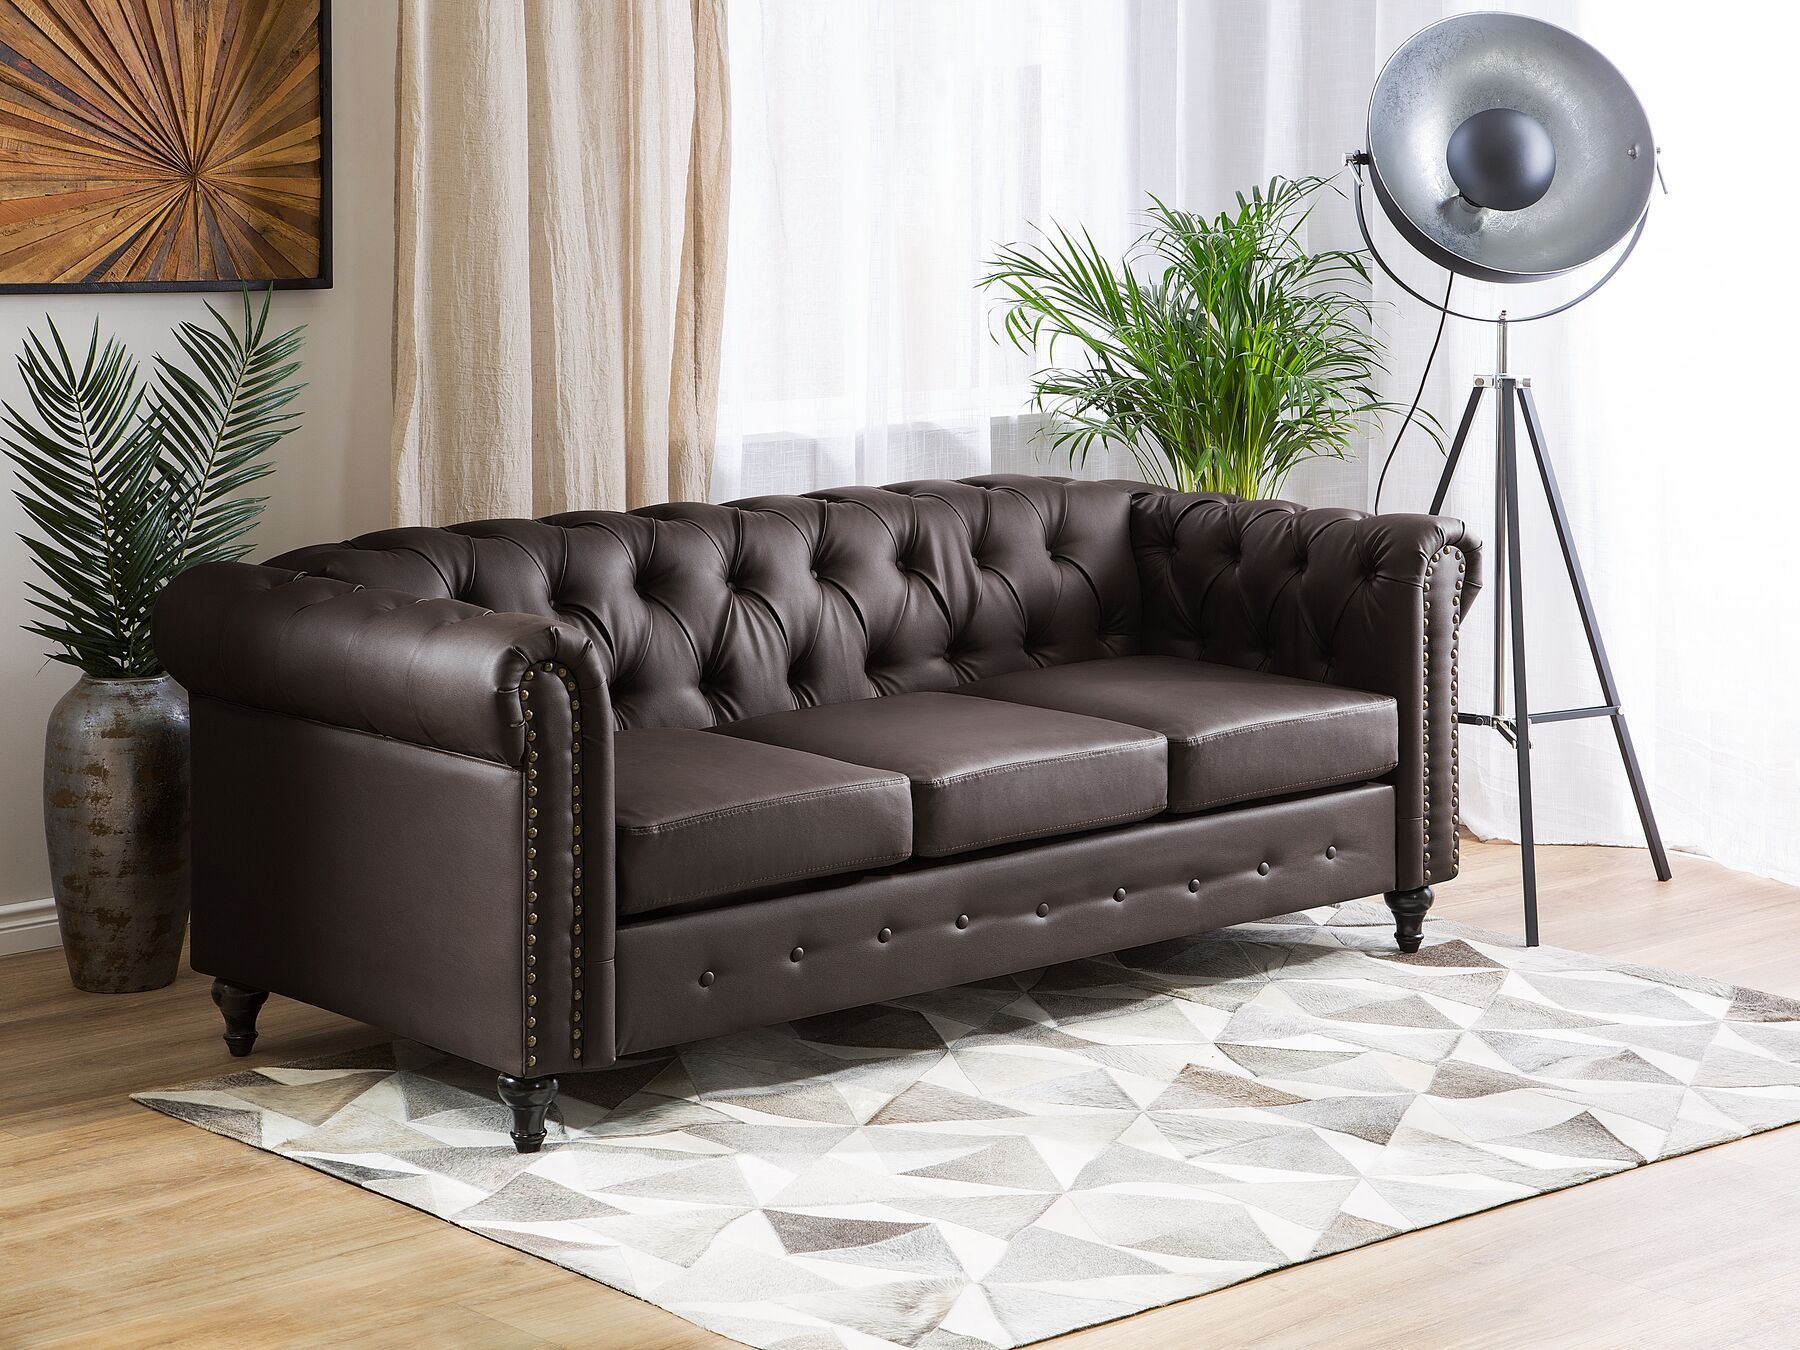 3 Seater Faux Leather Sofa Brown Chesterfield | Beliani (View 7 of 20)